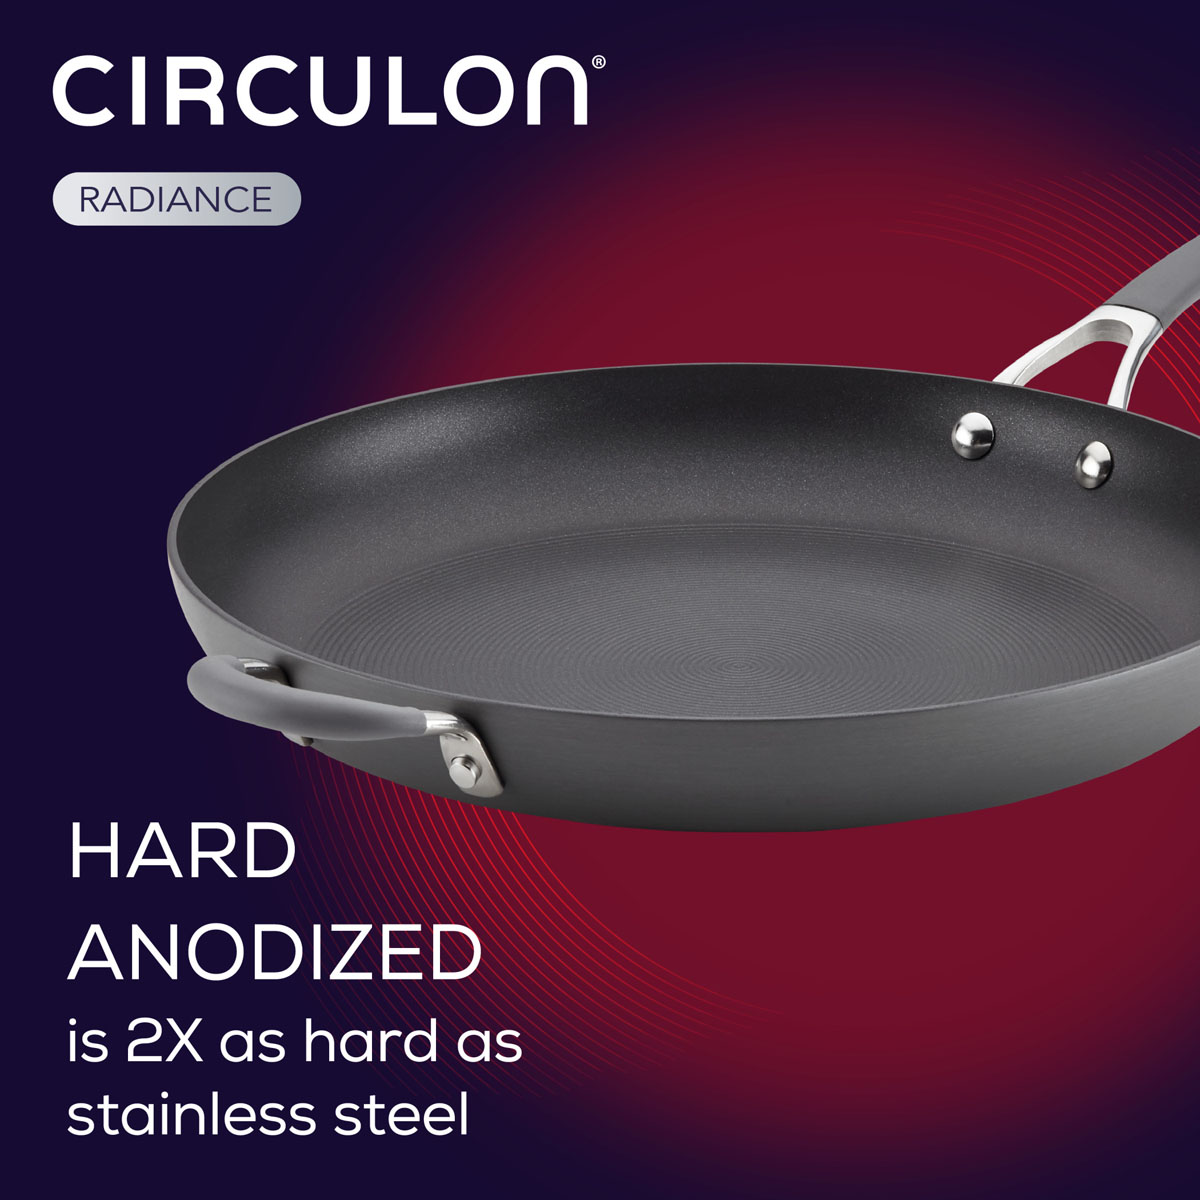 Circulon(R) Radiance 14in. Hard-Anodized Non-Stick Frying Pan